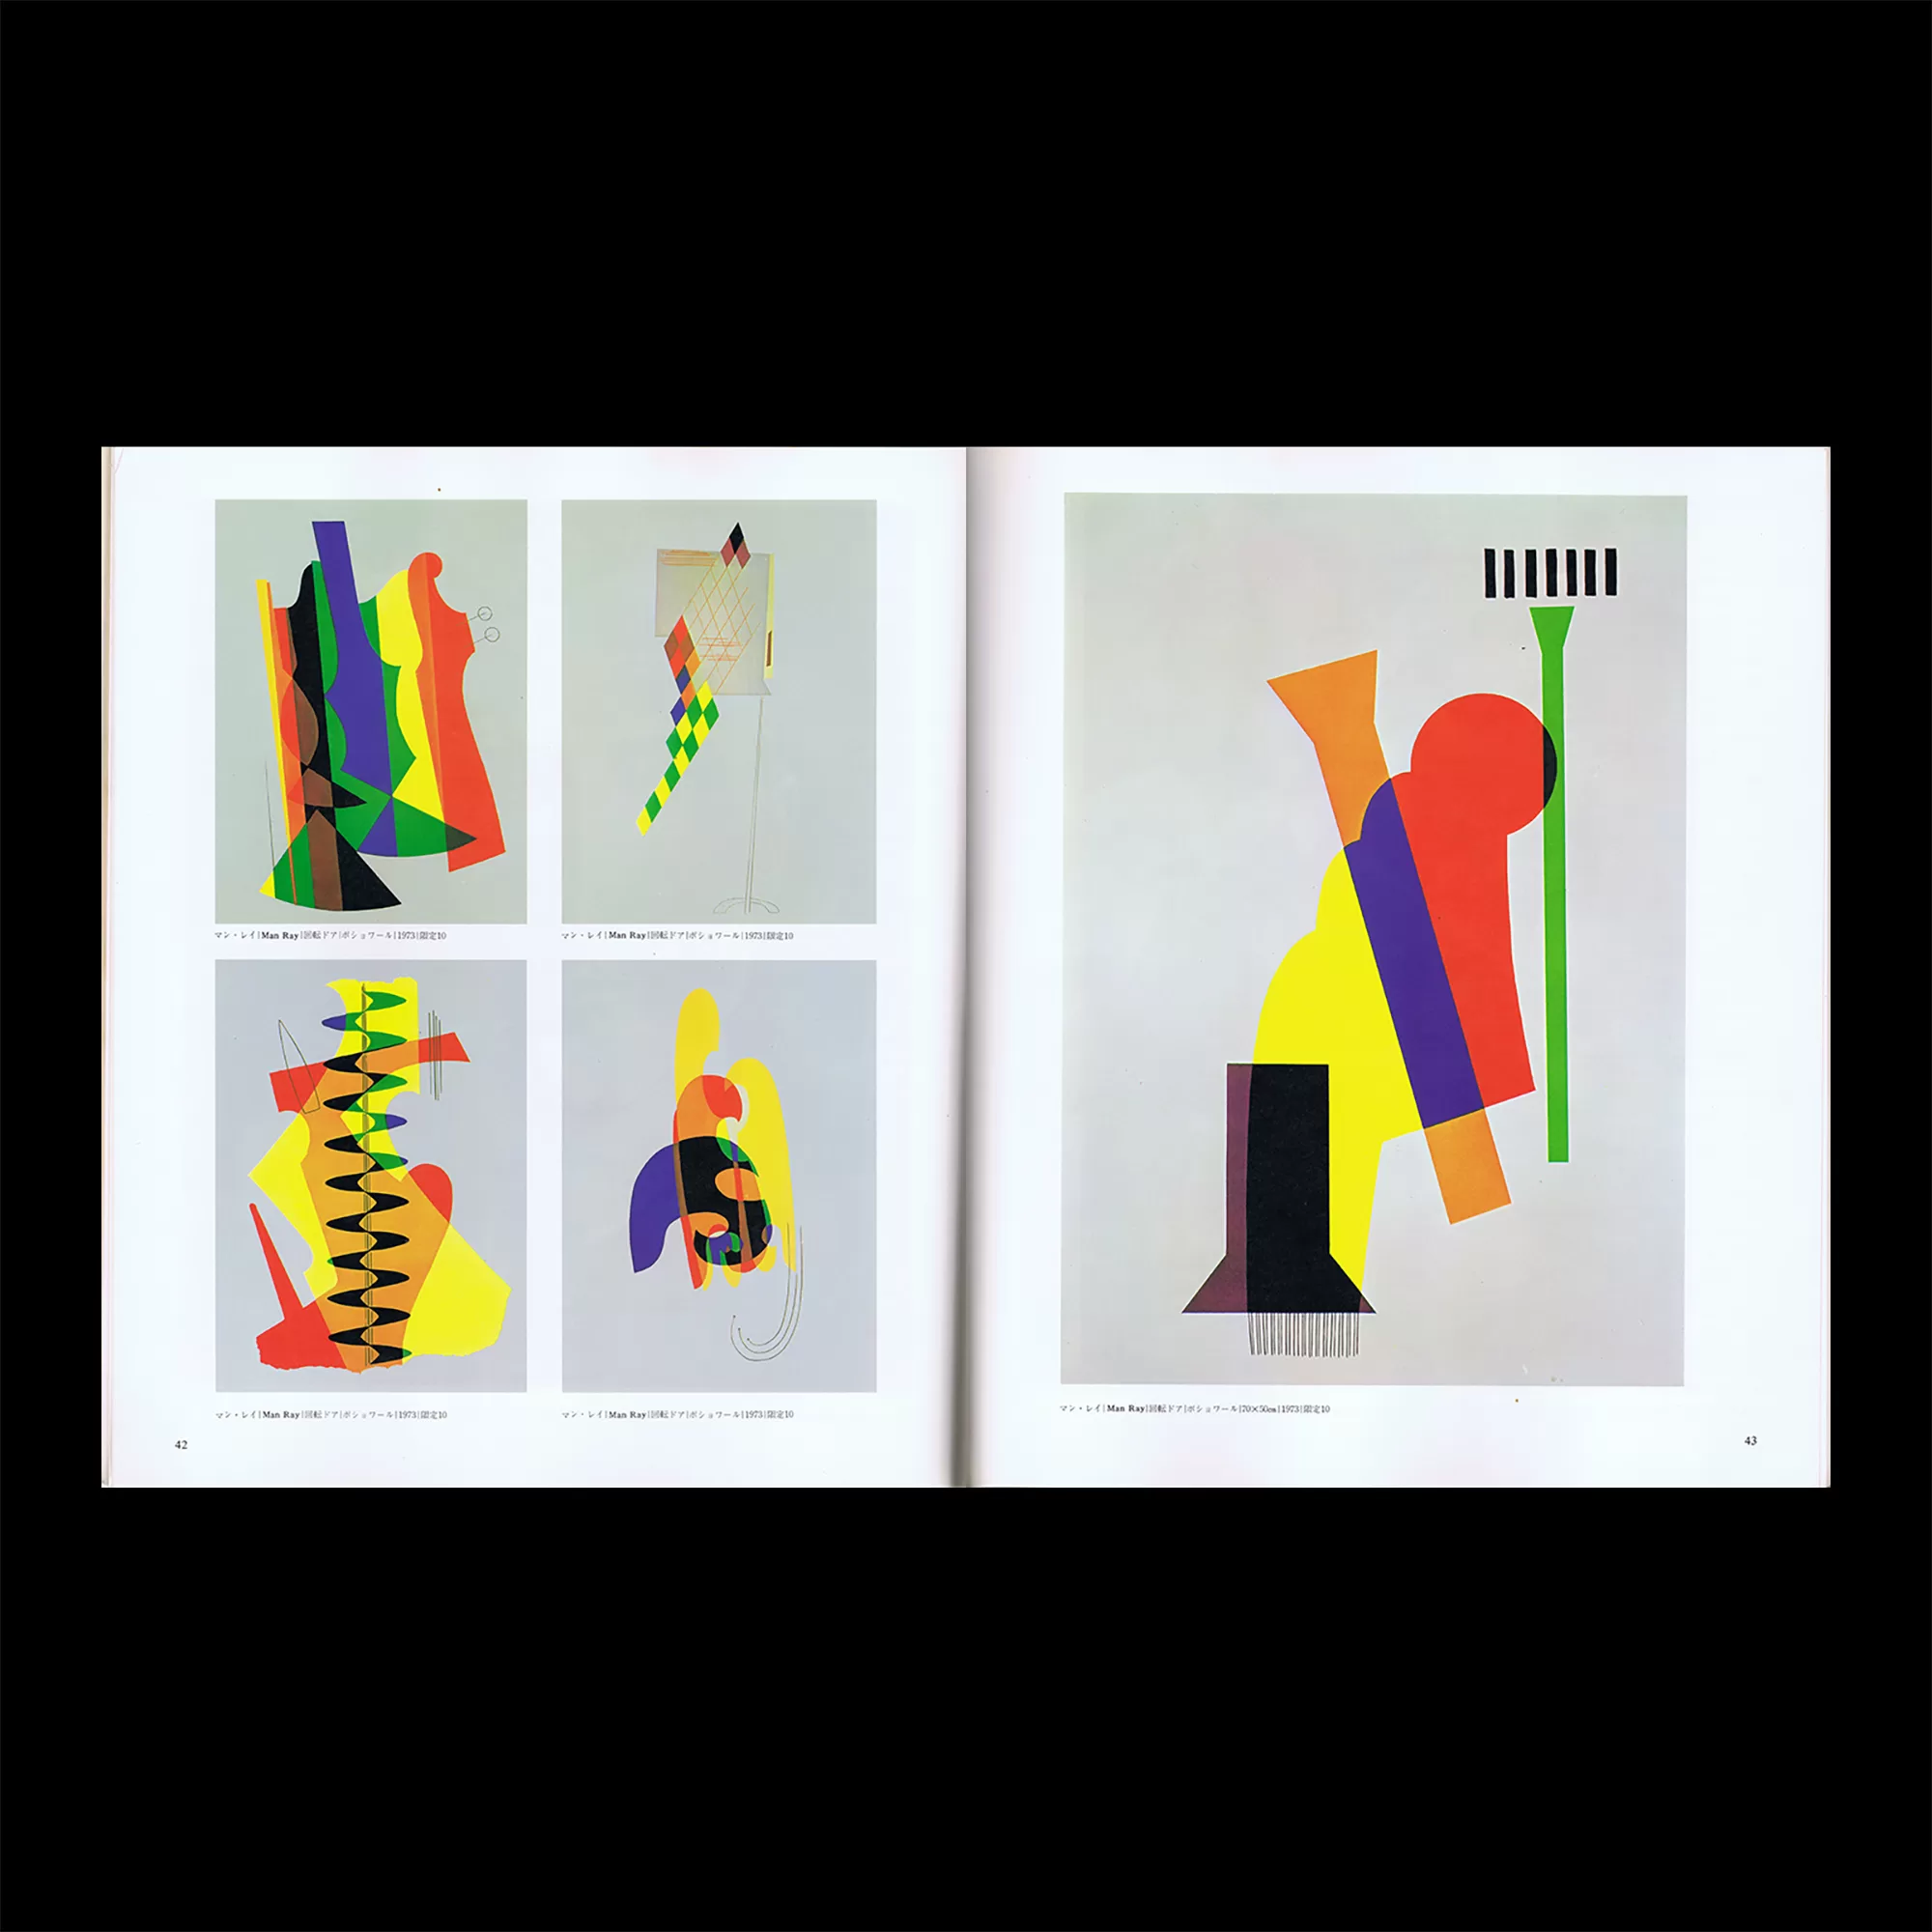 gq 04  - A Quarterly Review of the Graphic Work, 1974  - Man Ray Feature